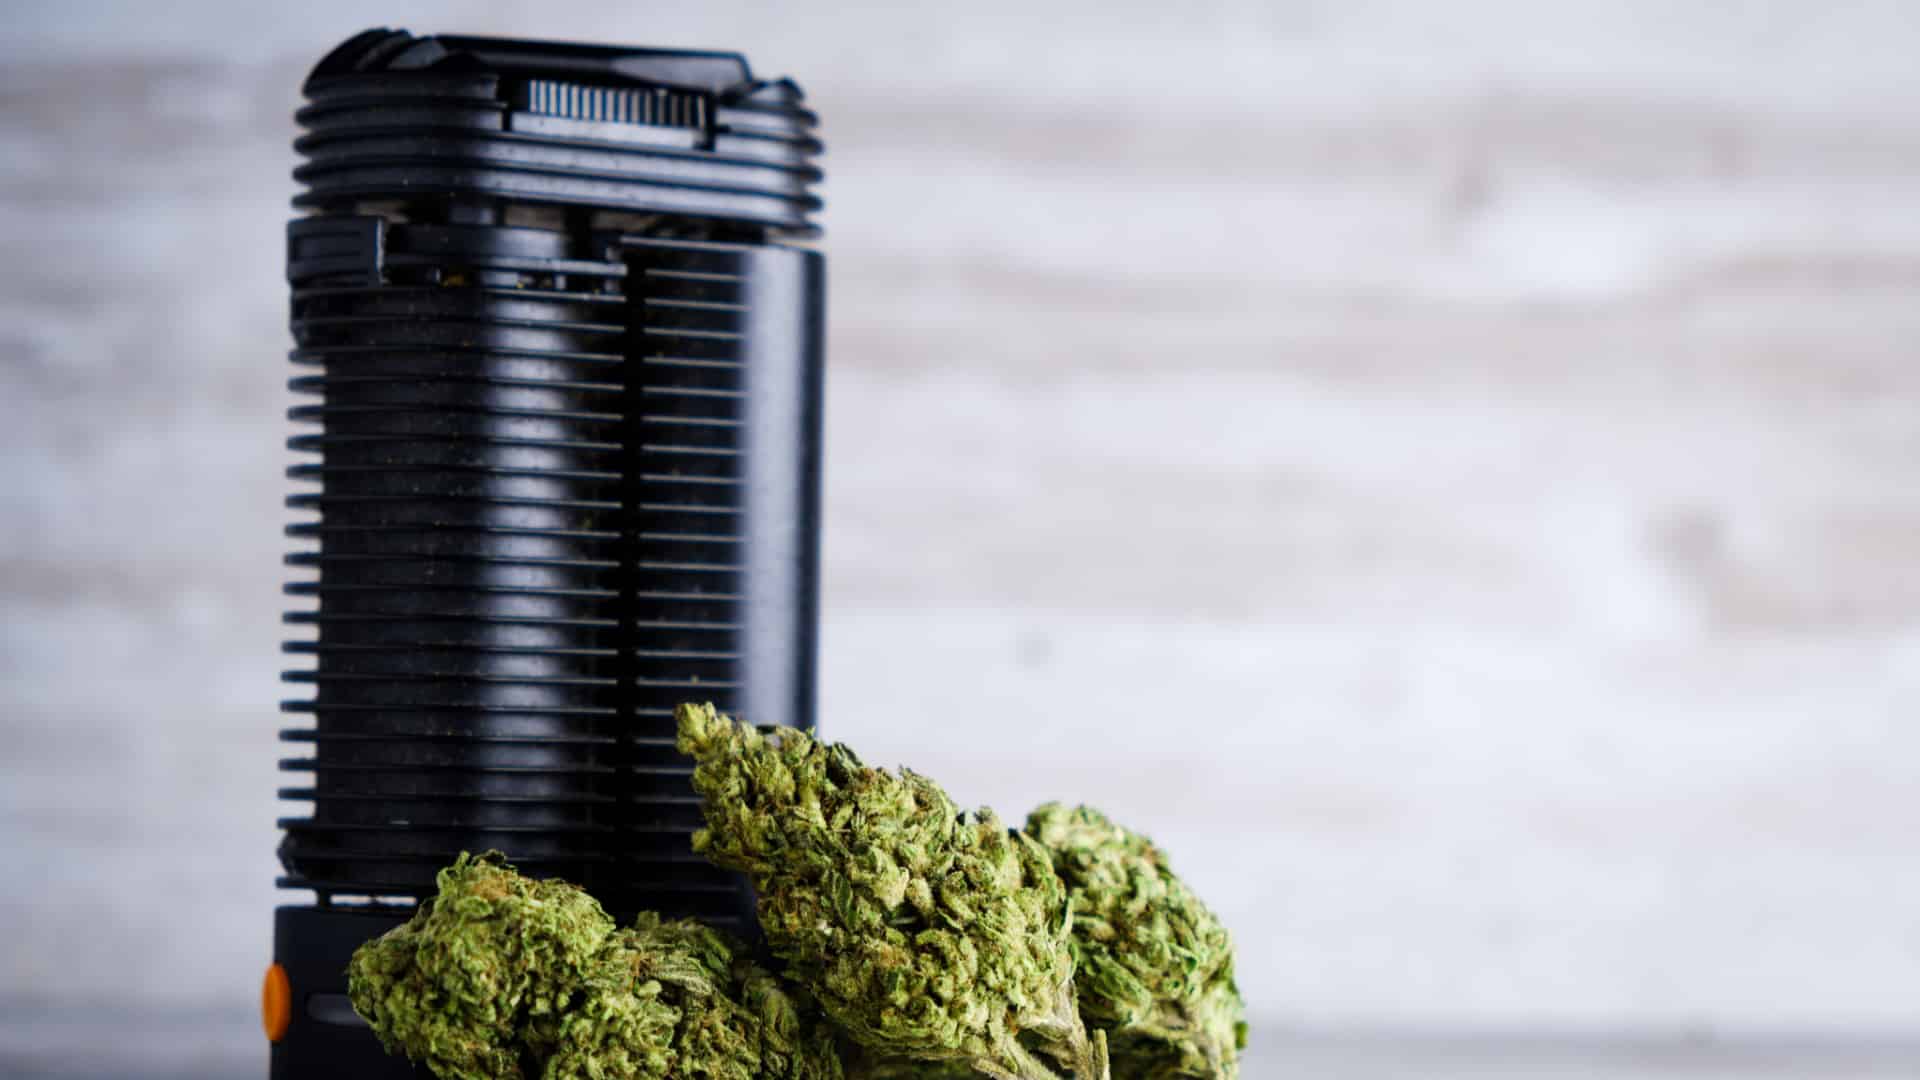 Cannabinthusiast | Five Ways to Clean Up Your High | Vapes